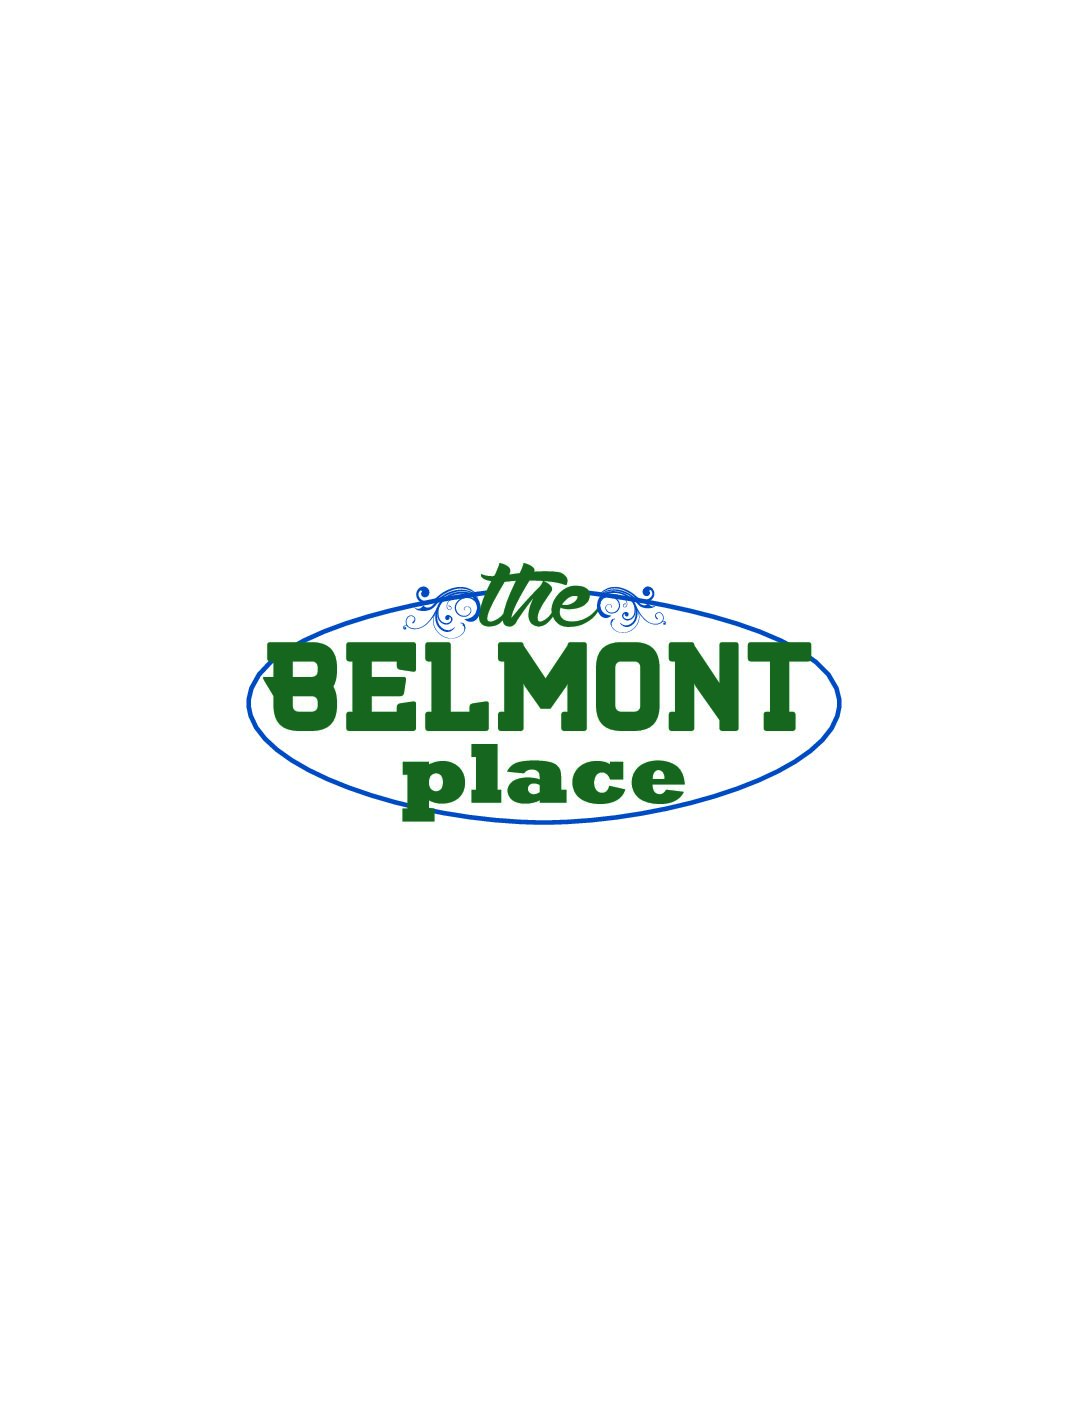 The Belmont Place